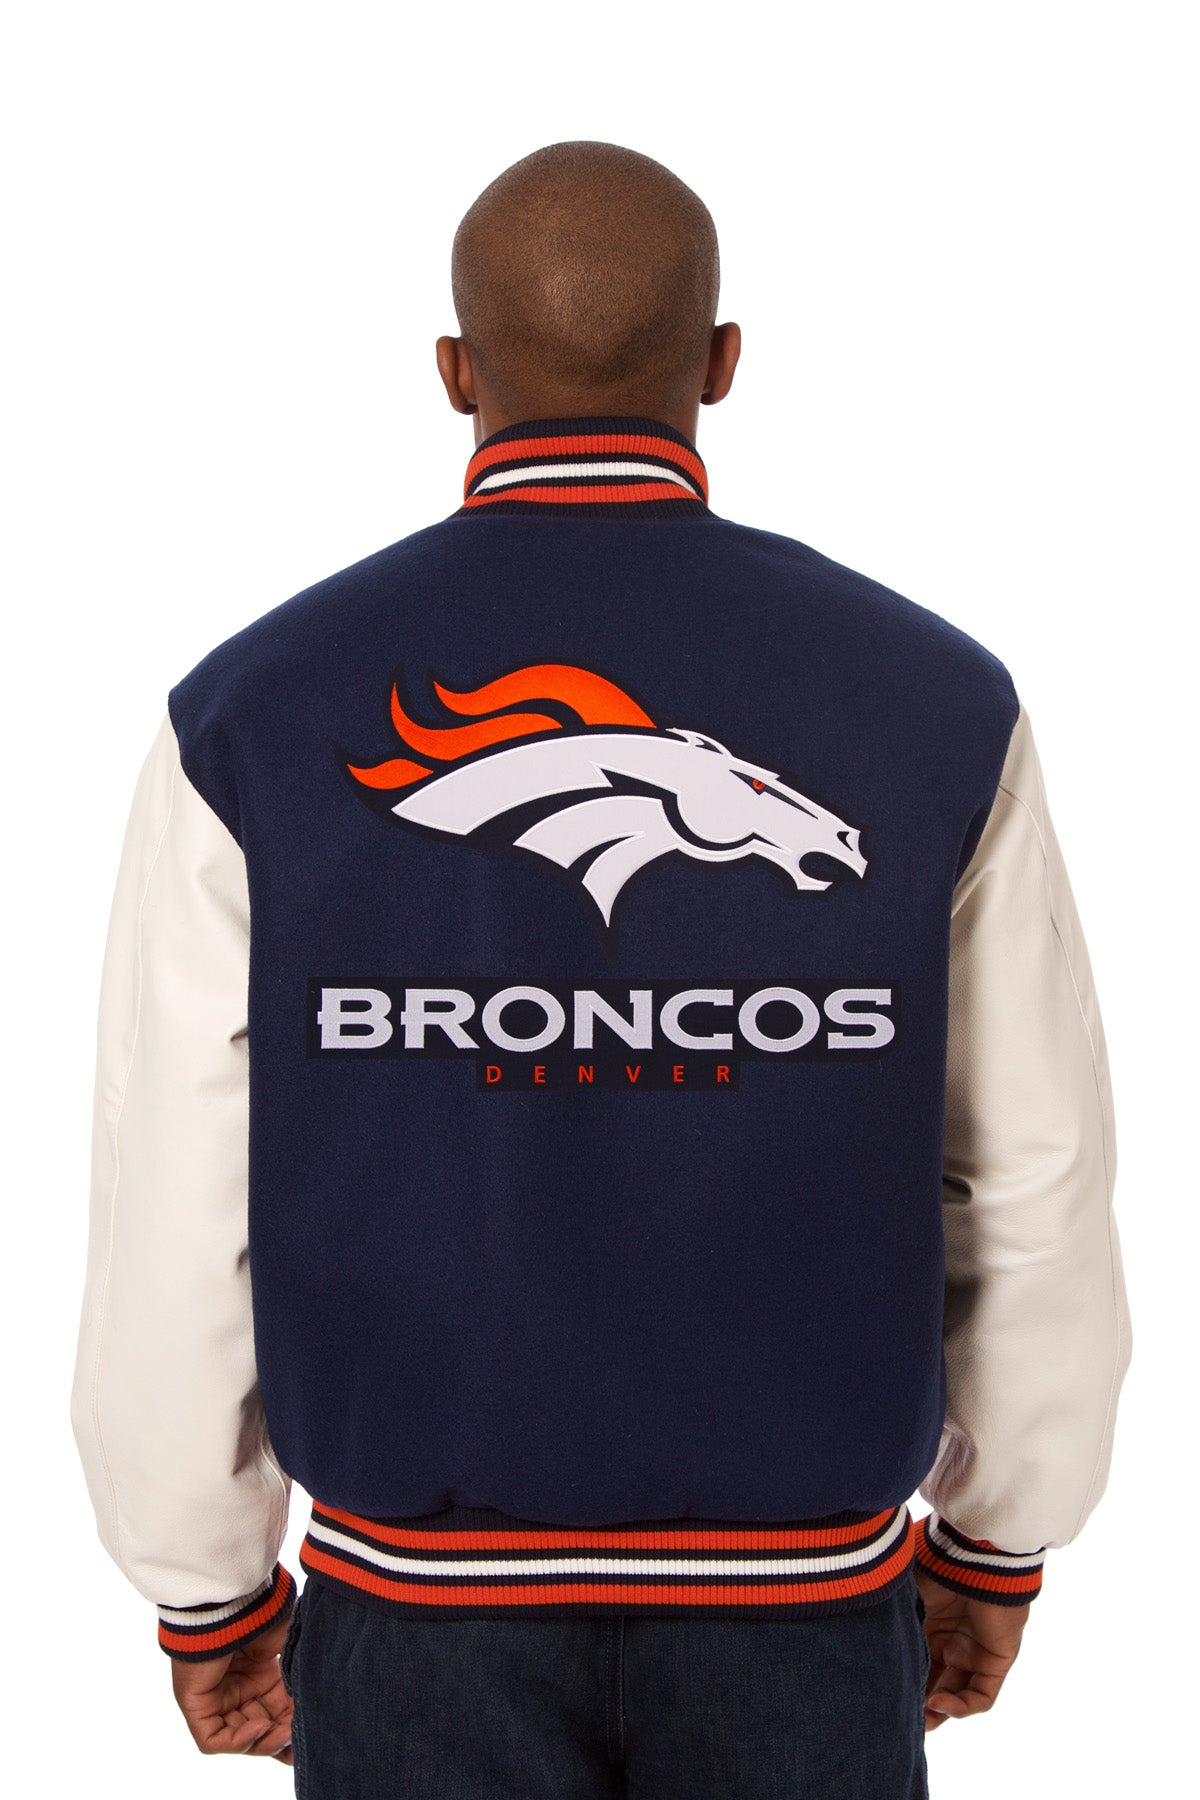 Denver Broncos Embroidered Wool and Leather Jacket